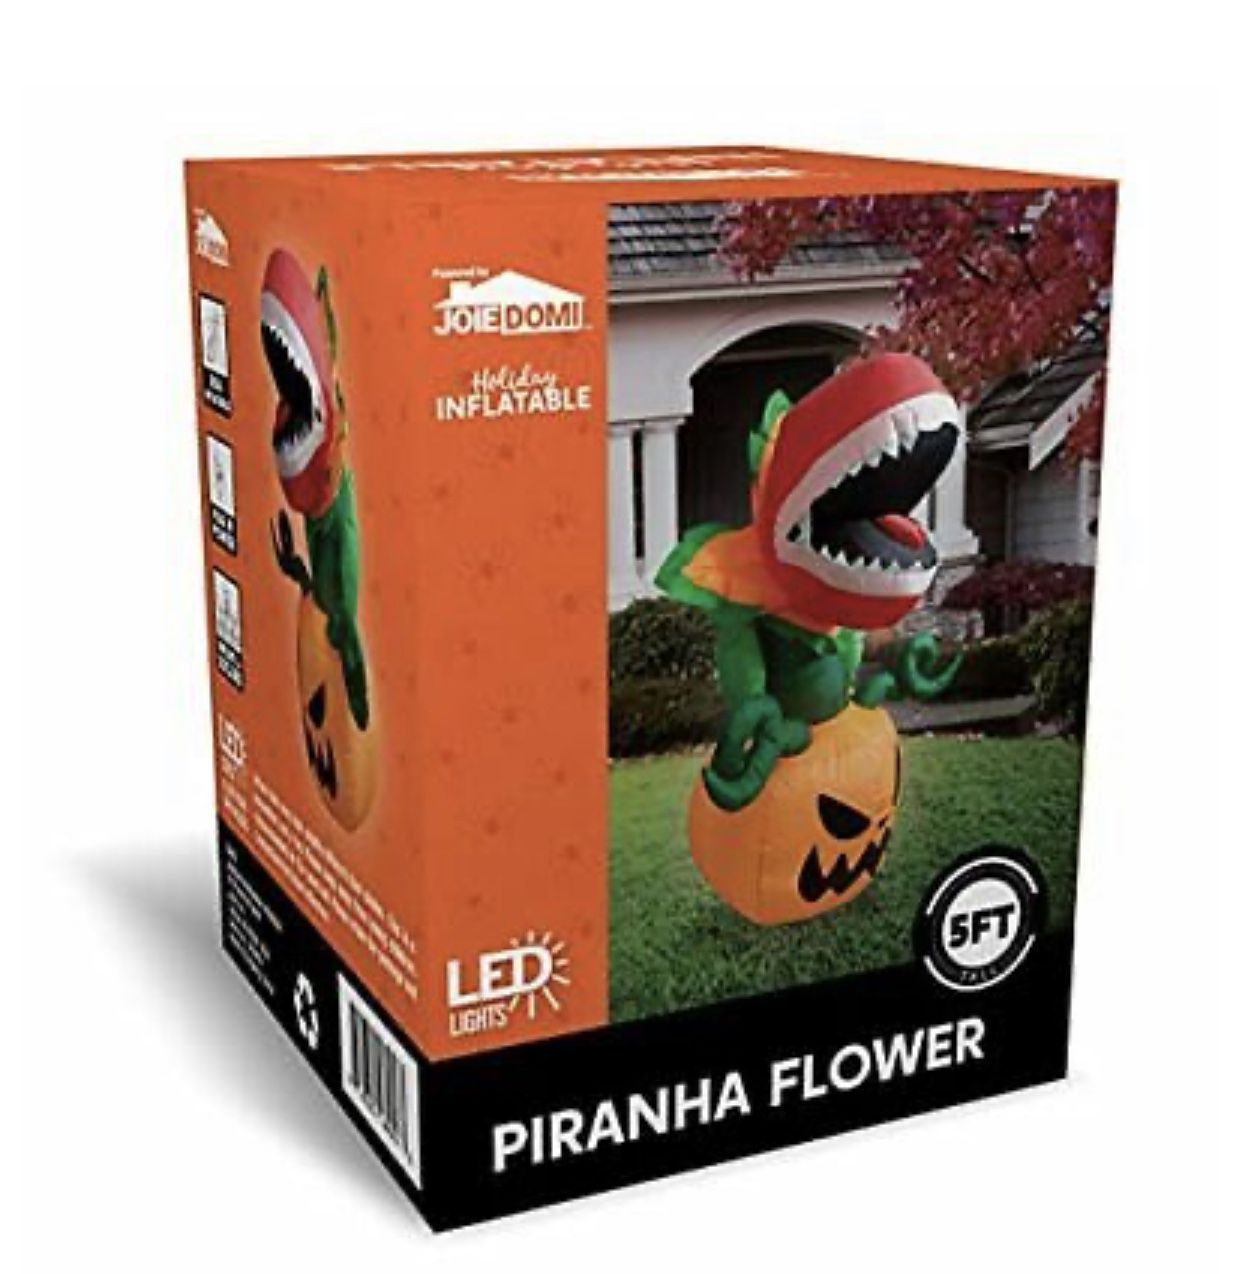 5 FT Halloween Inflatable Piranha Flower LED Lights Blow Up Outdoor Decorations